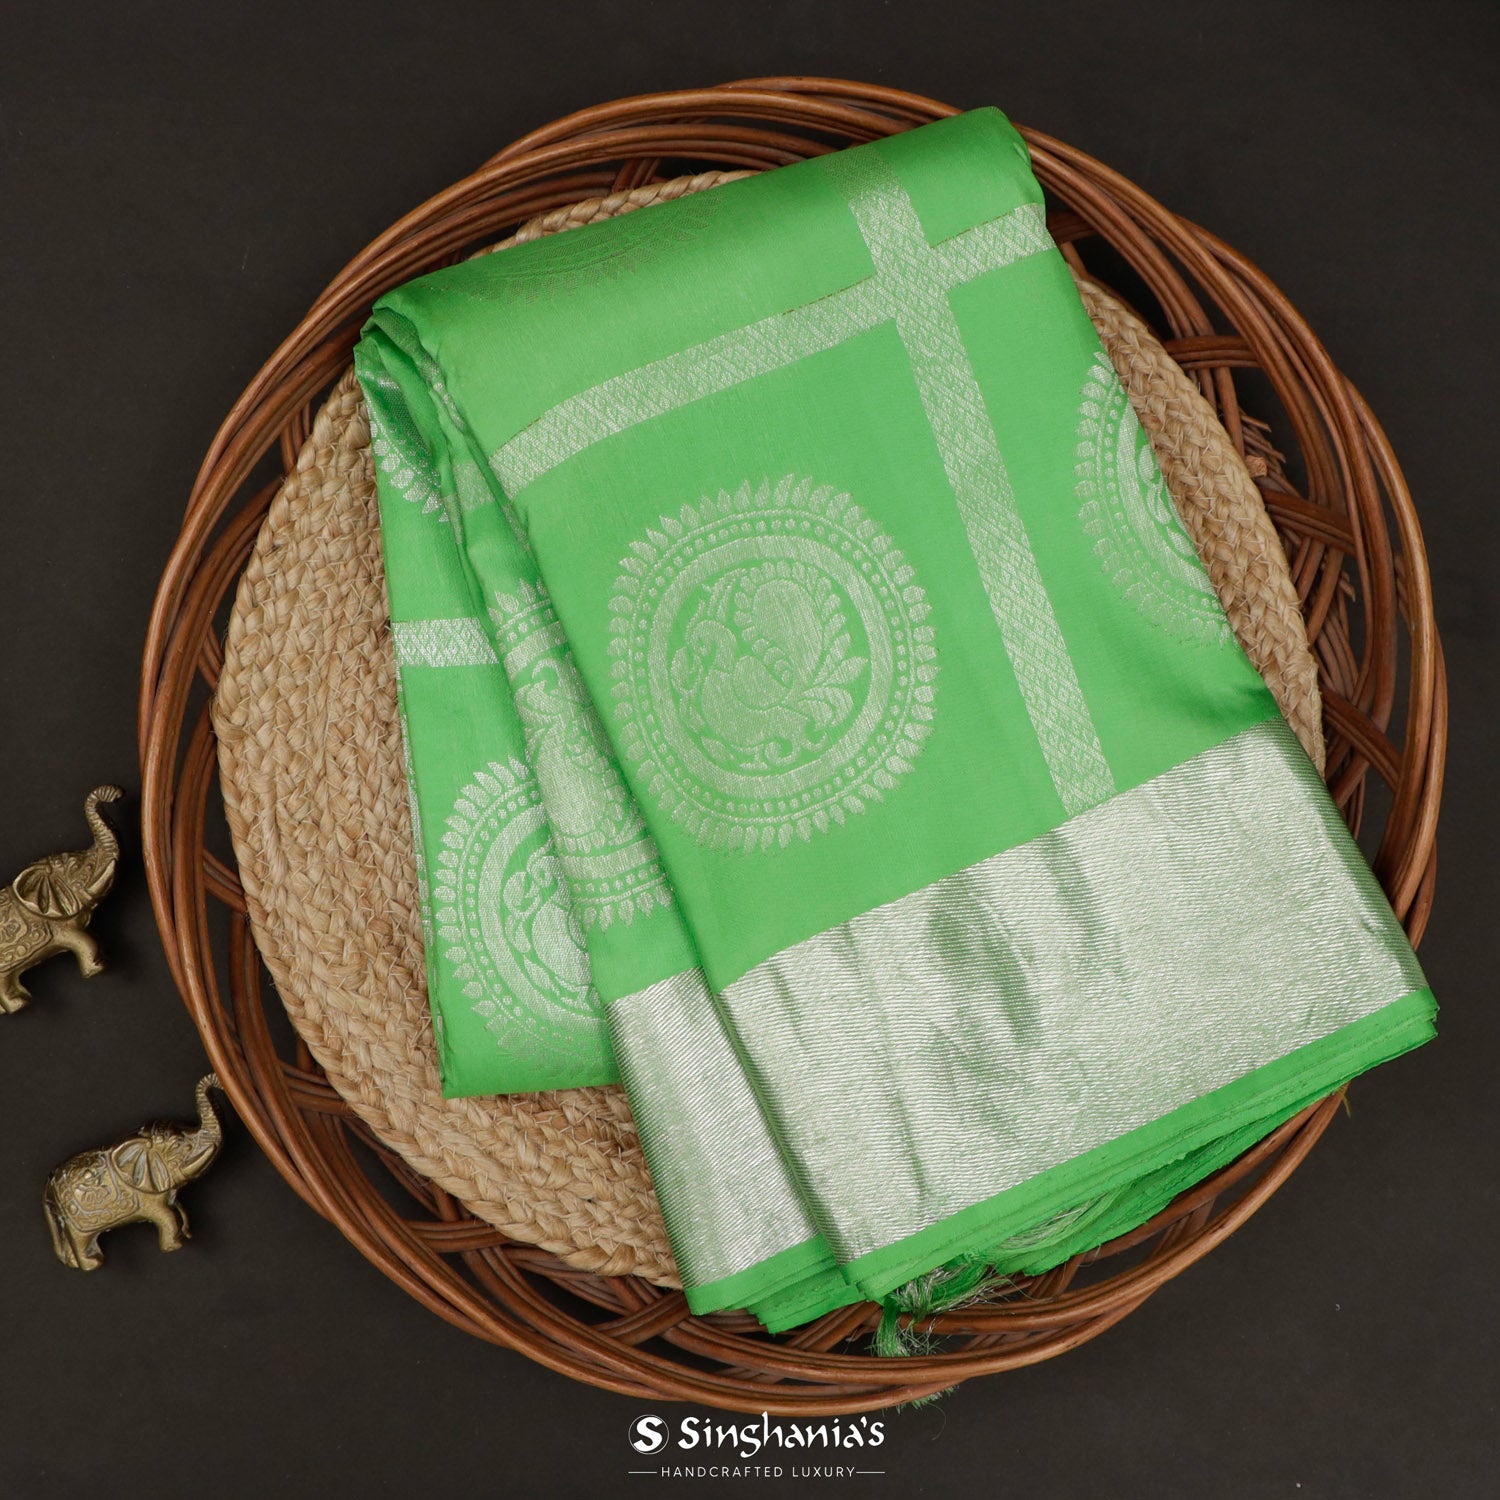 Parrot Green Kanchi Saree With Peacock Motifs In Checks Pattern